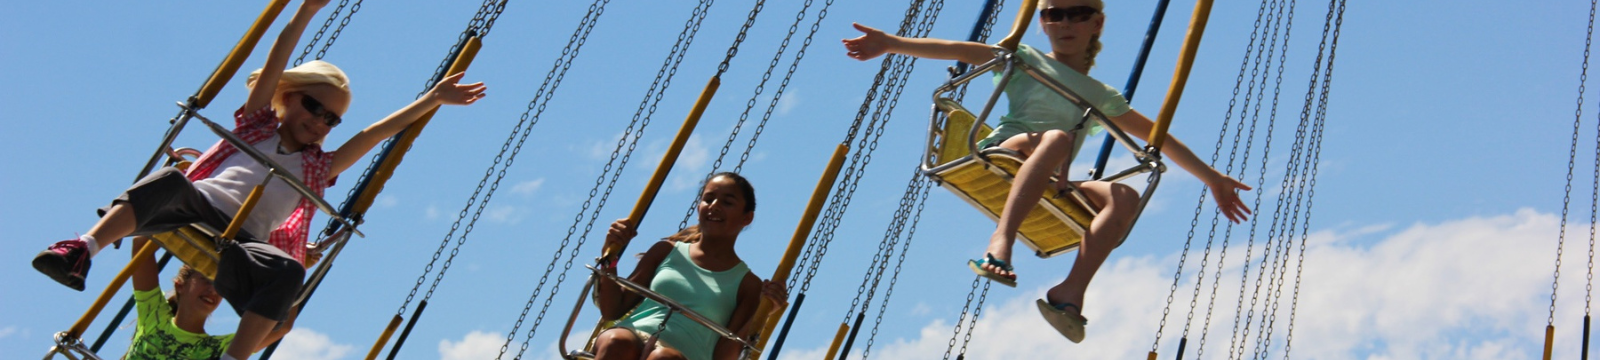 Children and adults on swing carnival ride